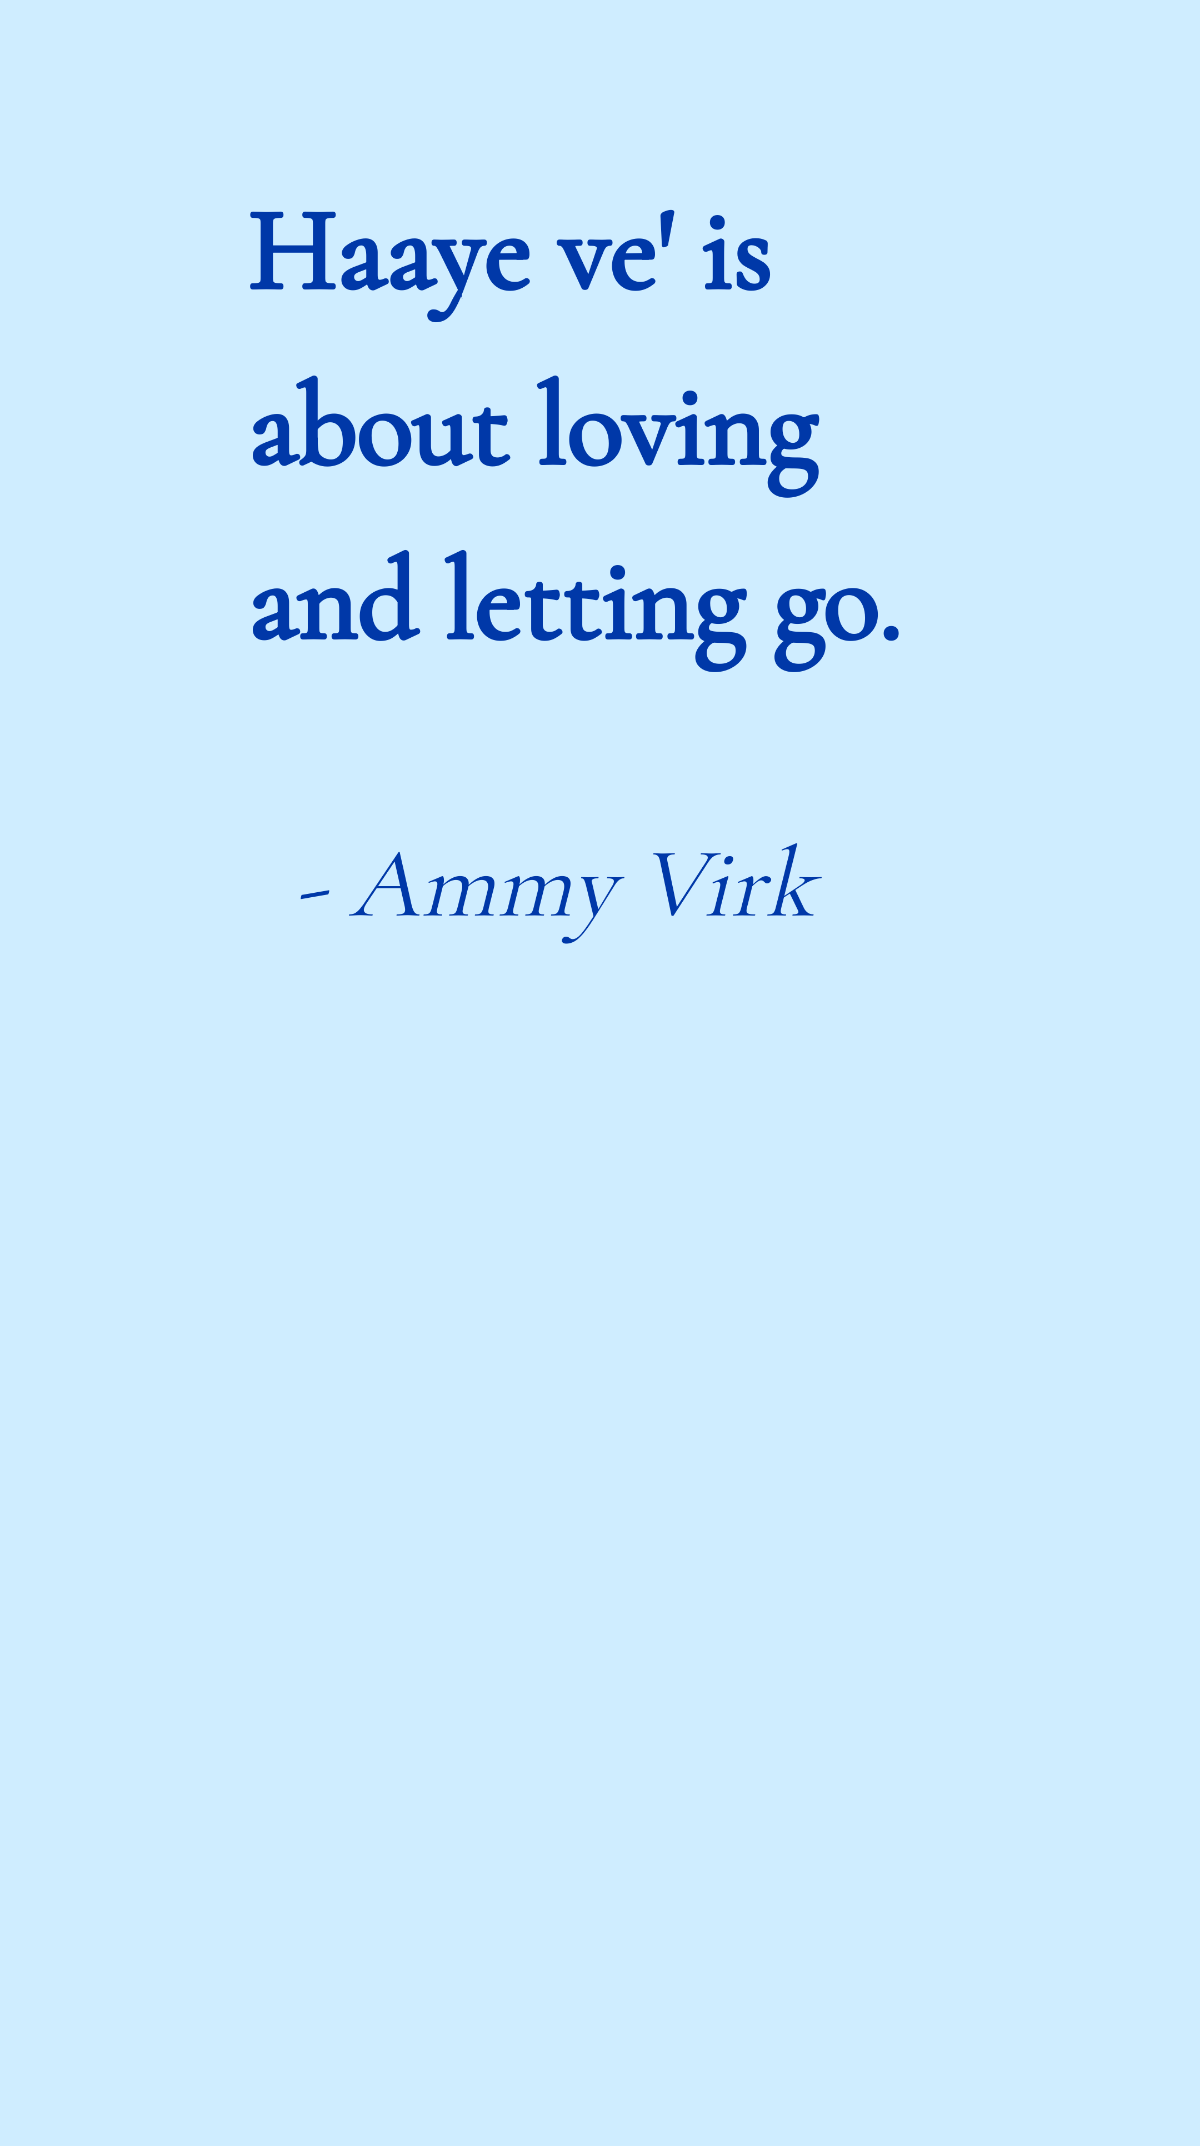 Ammy Virk - Haaye ve' is about loving and letting go.